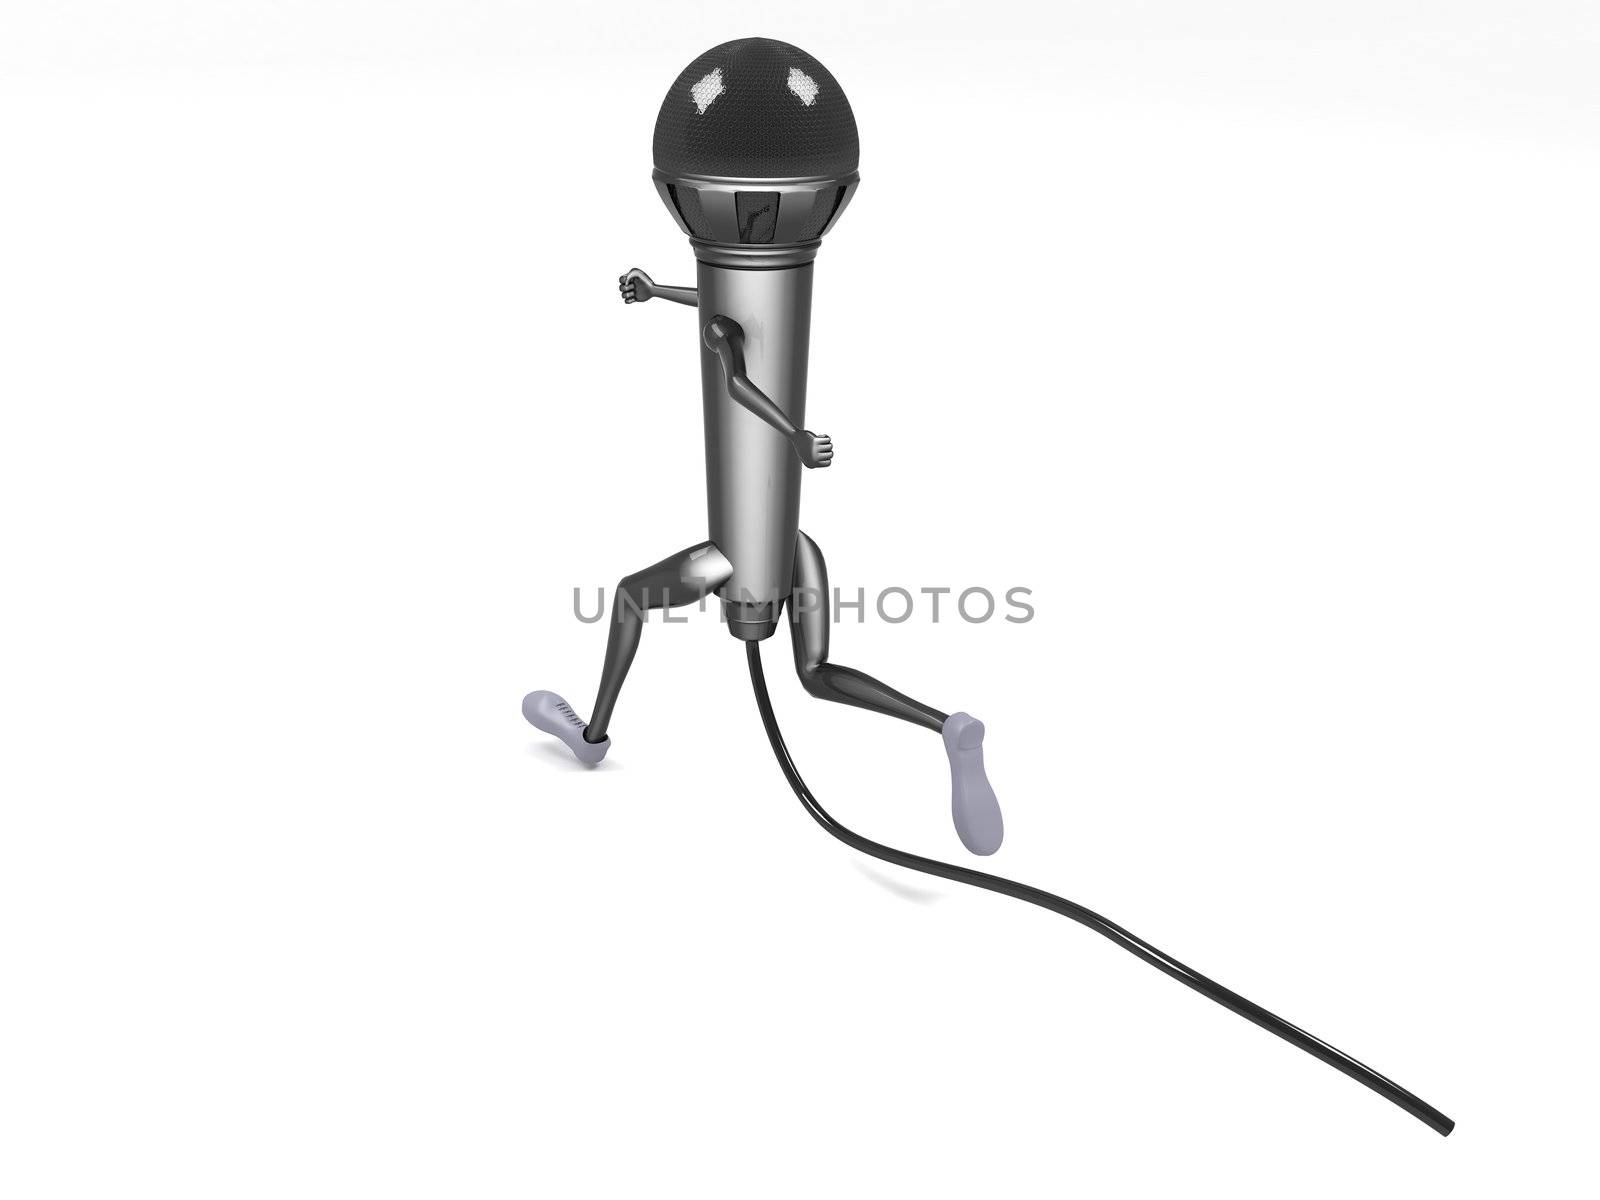 back pose of three dimensional running microphone by imagerymajestic